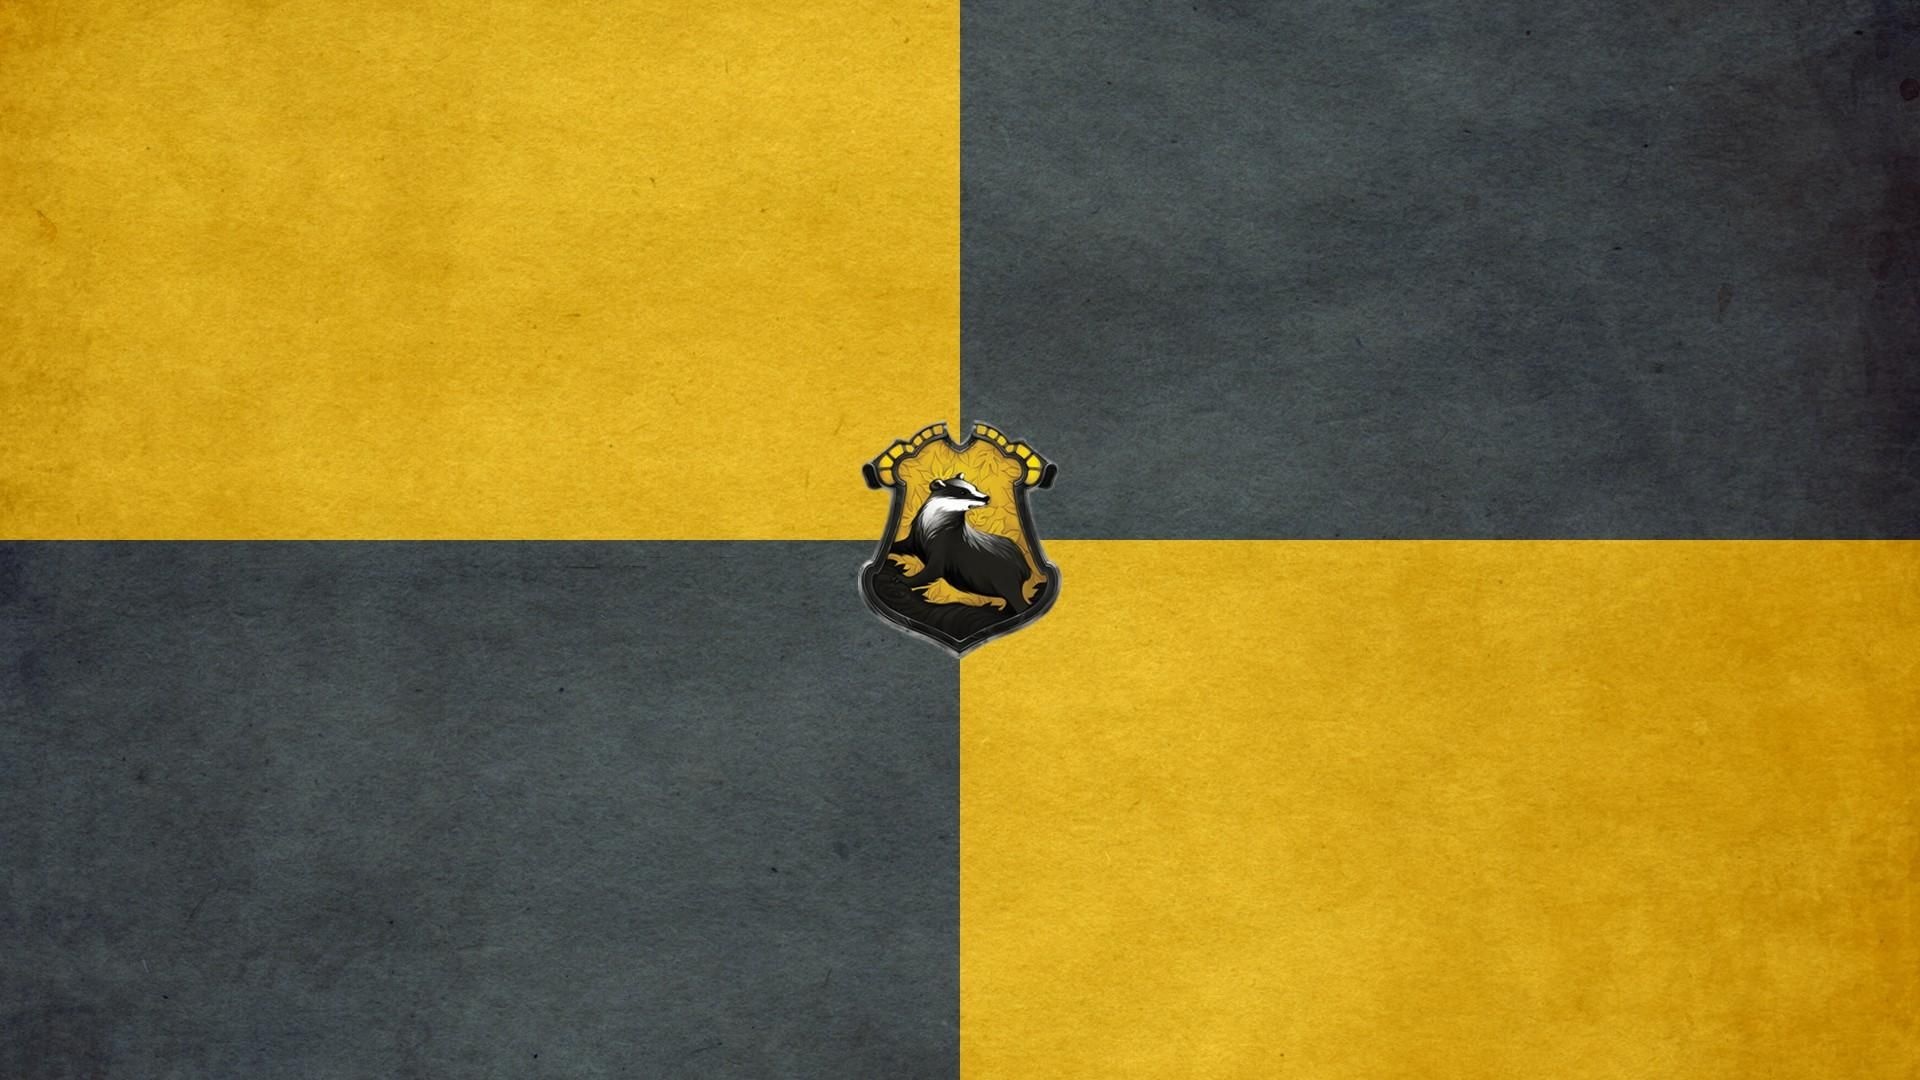 Hufflepuff wallpapers, Top free backgrounds, House pride, Loyalty, 1920x1080 Full HD Desktop